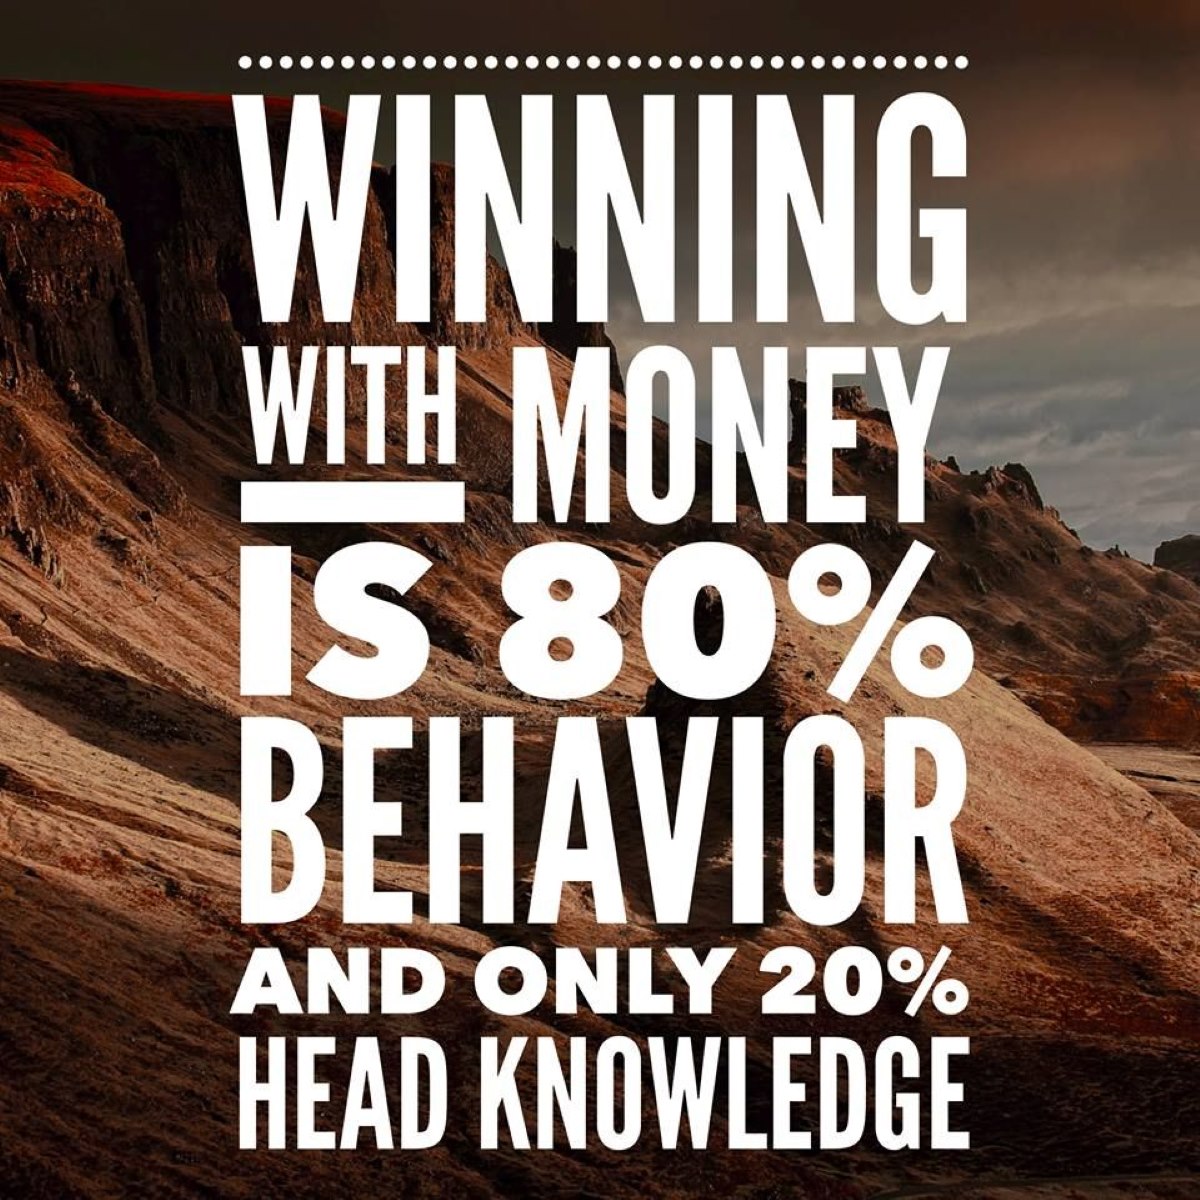 What Percentage Of Personal Finance Is Head Knowledge?